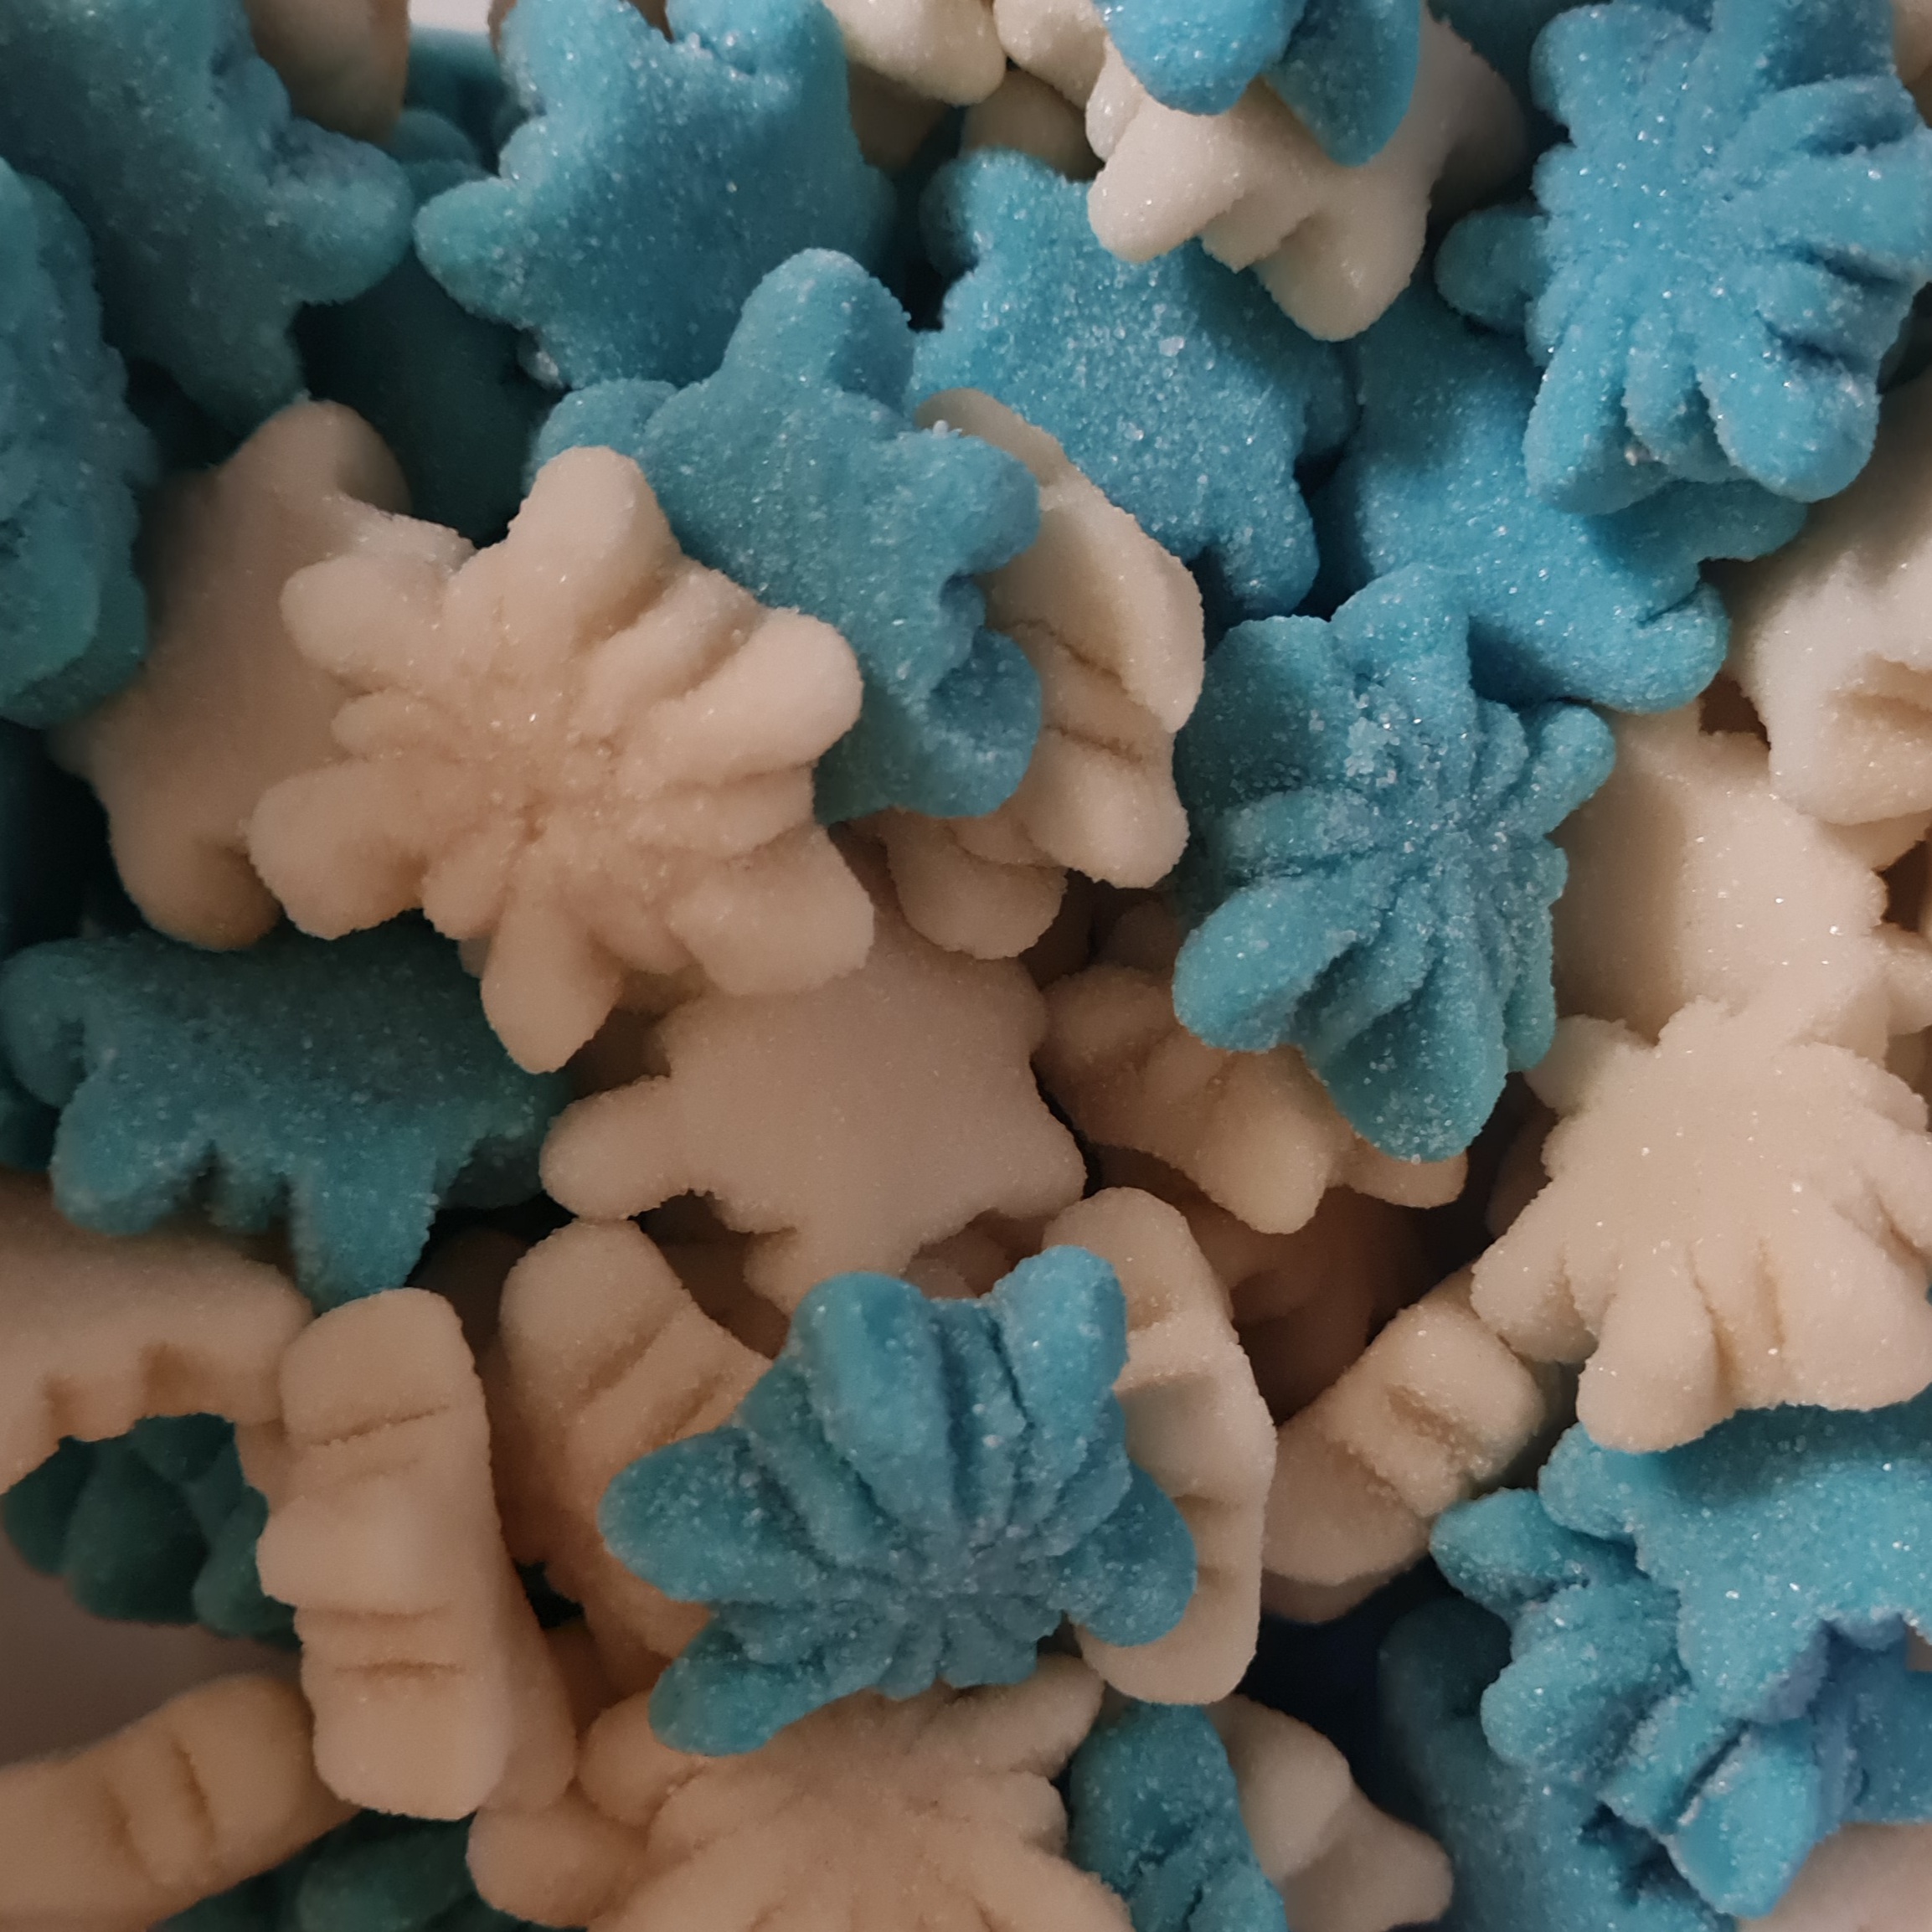 Blue & White Snow Flakes Christmas Pick & Mix Sweets Kingsway 100g